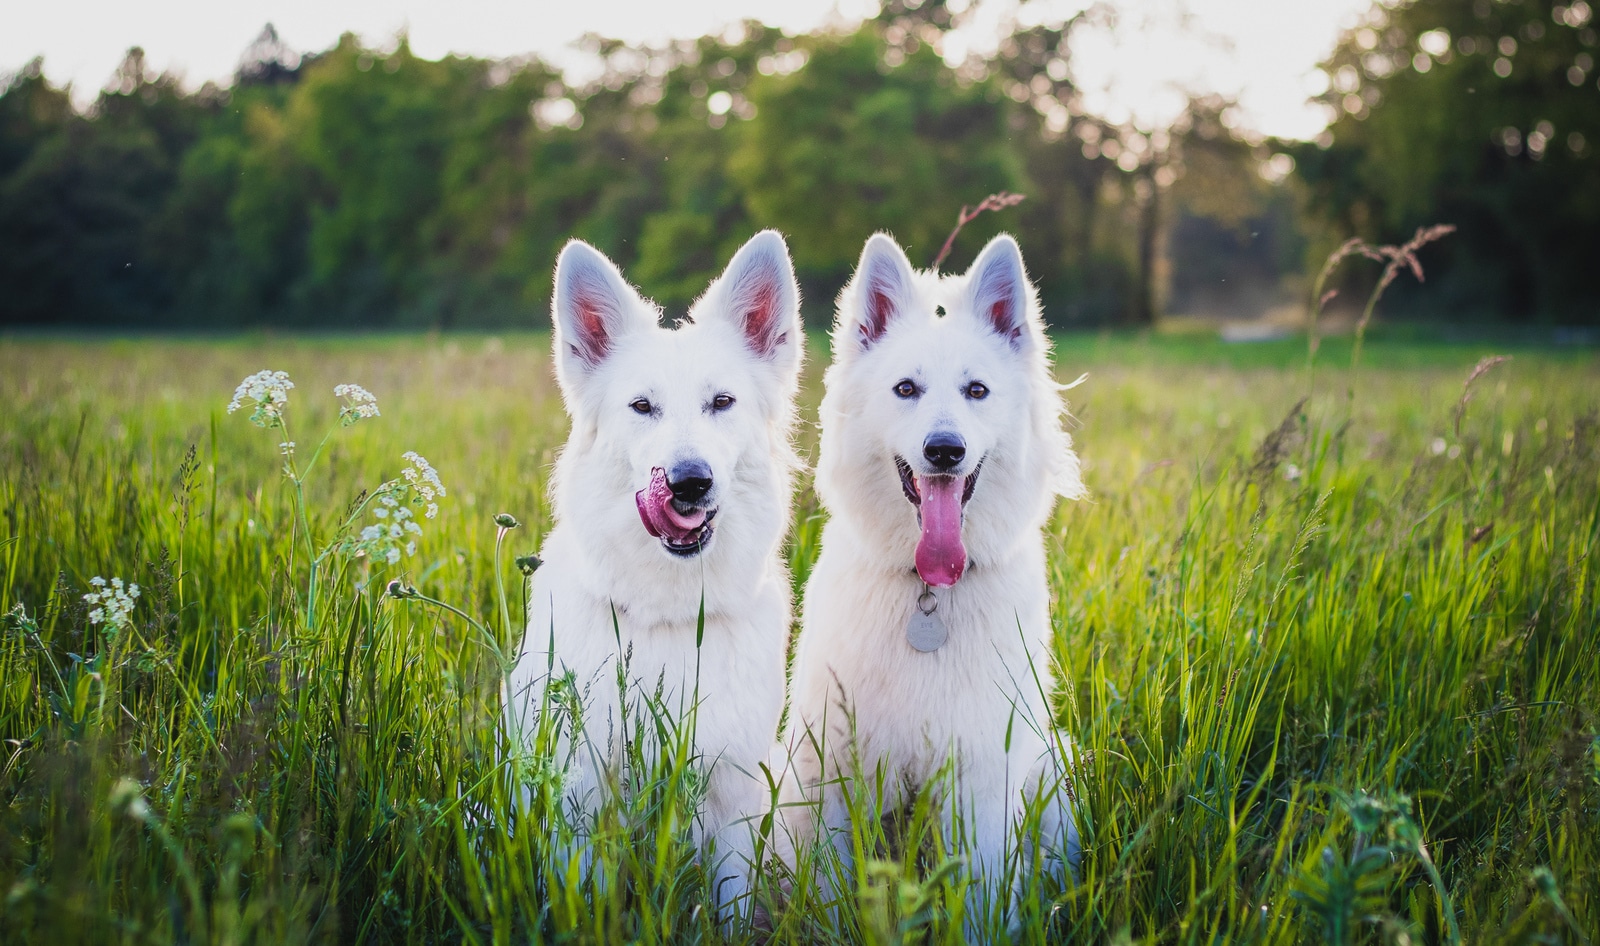 Vegan Diet For Dogs Linked to Better Health, New Study Finds